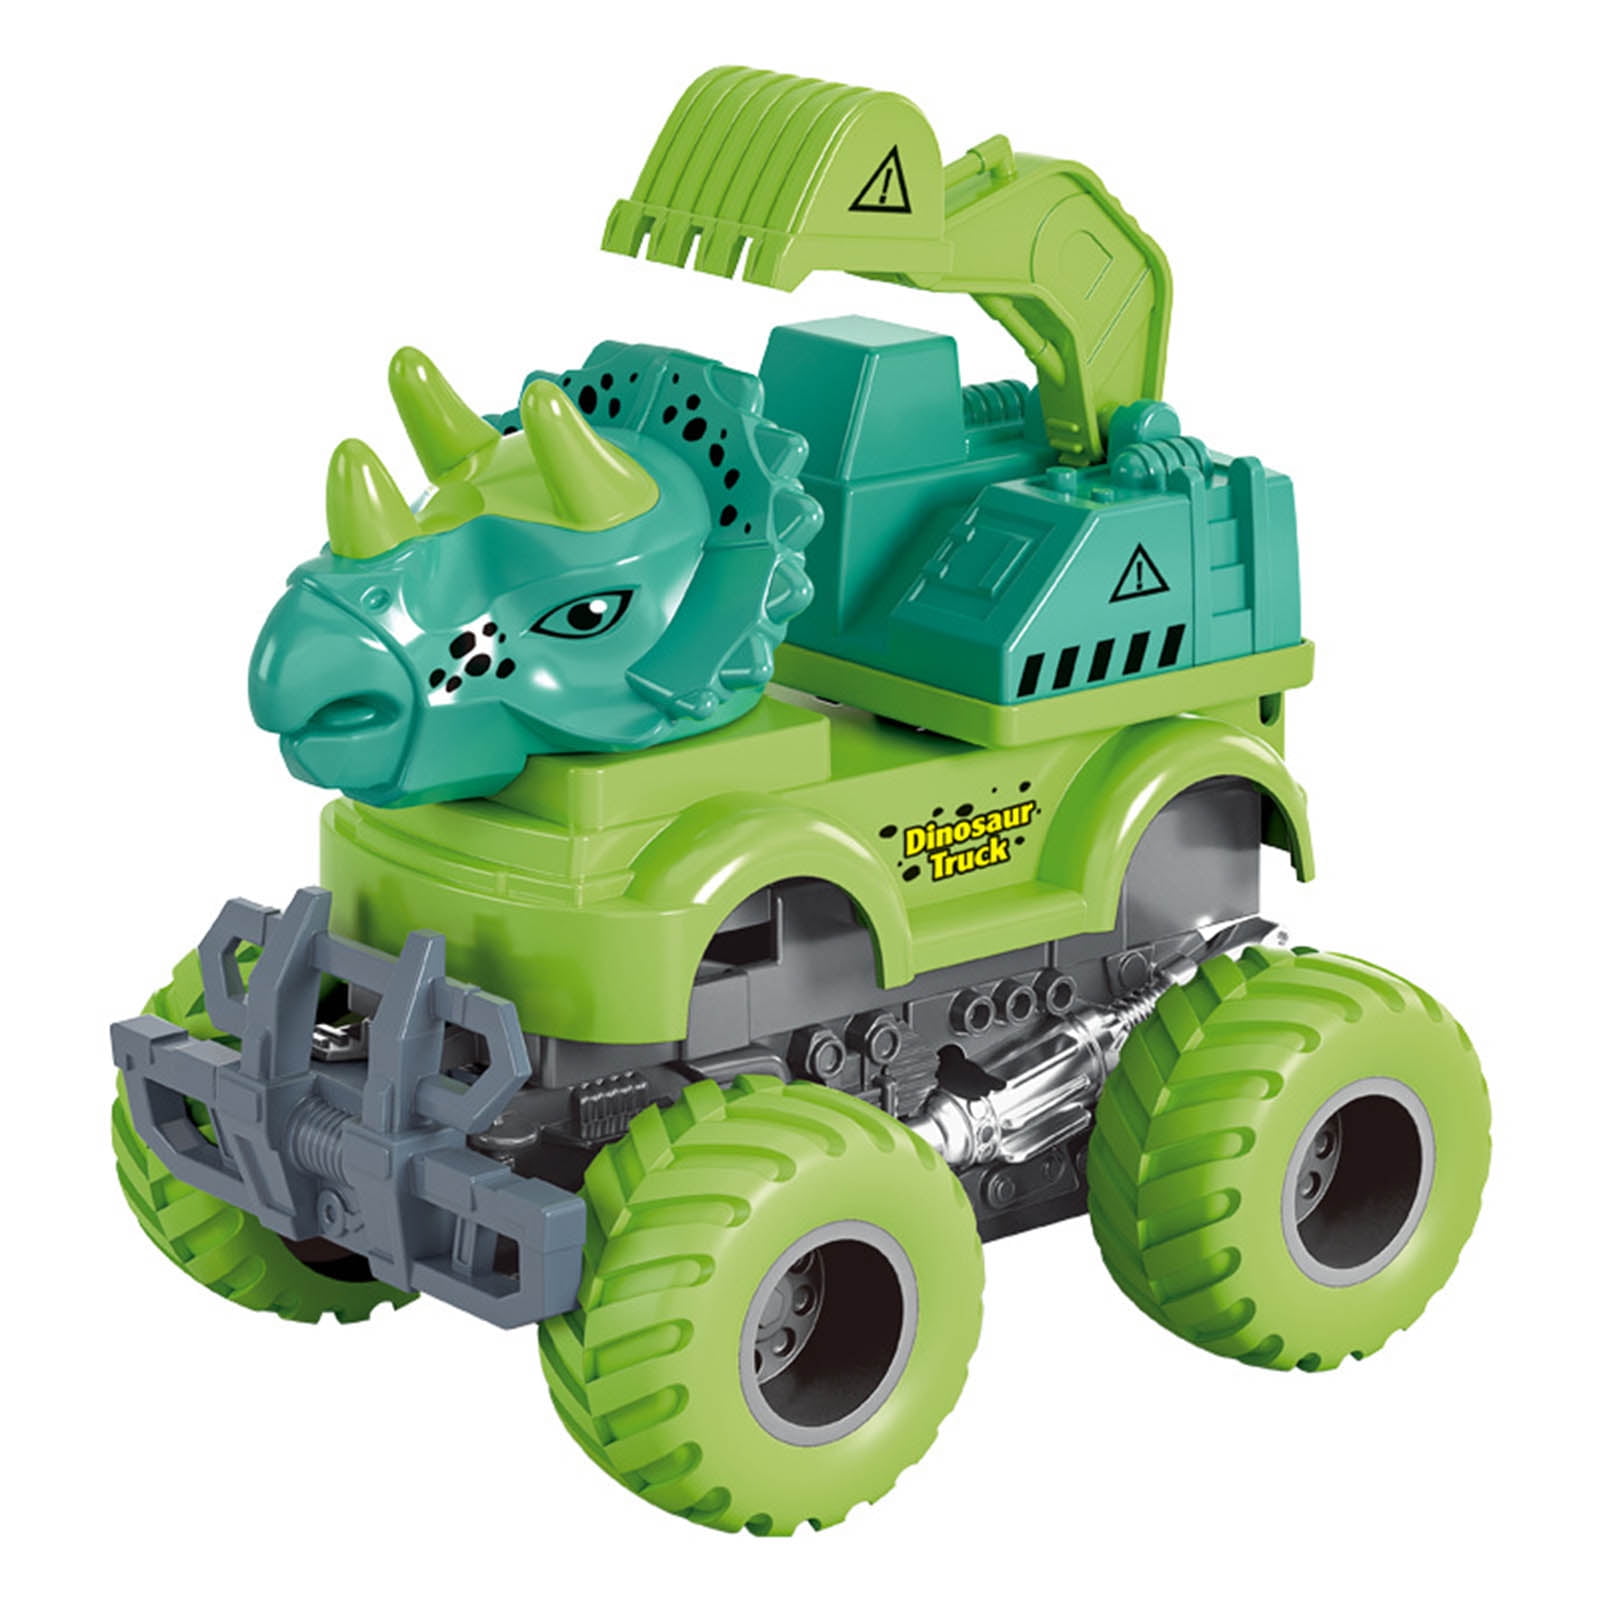 Boc Baby Inertia Car Toy Safe Interactive Colorful Cartoon Dinosaur Baby  Blaze Truck Toy for Home 